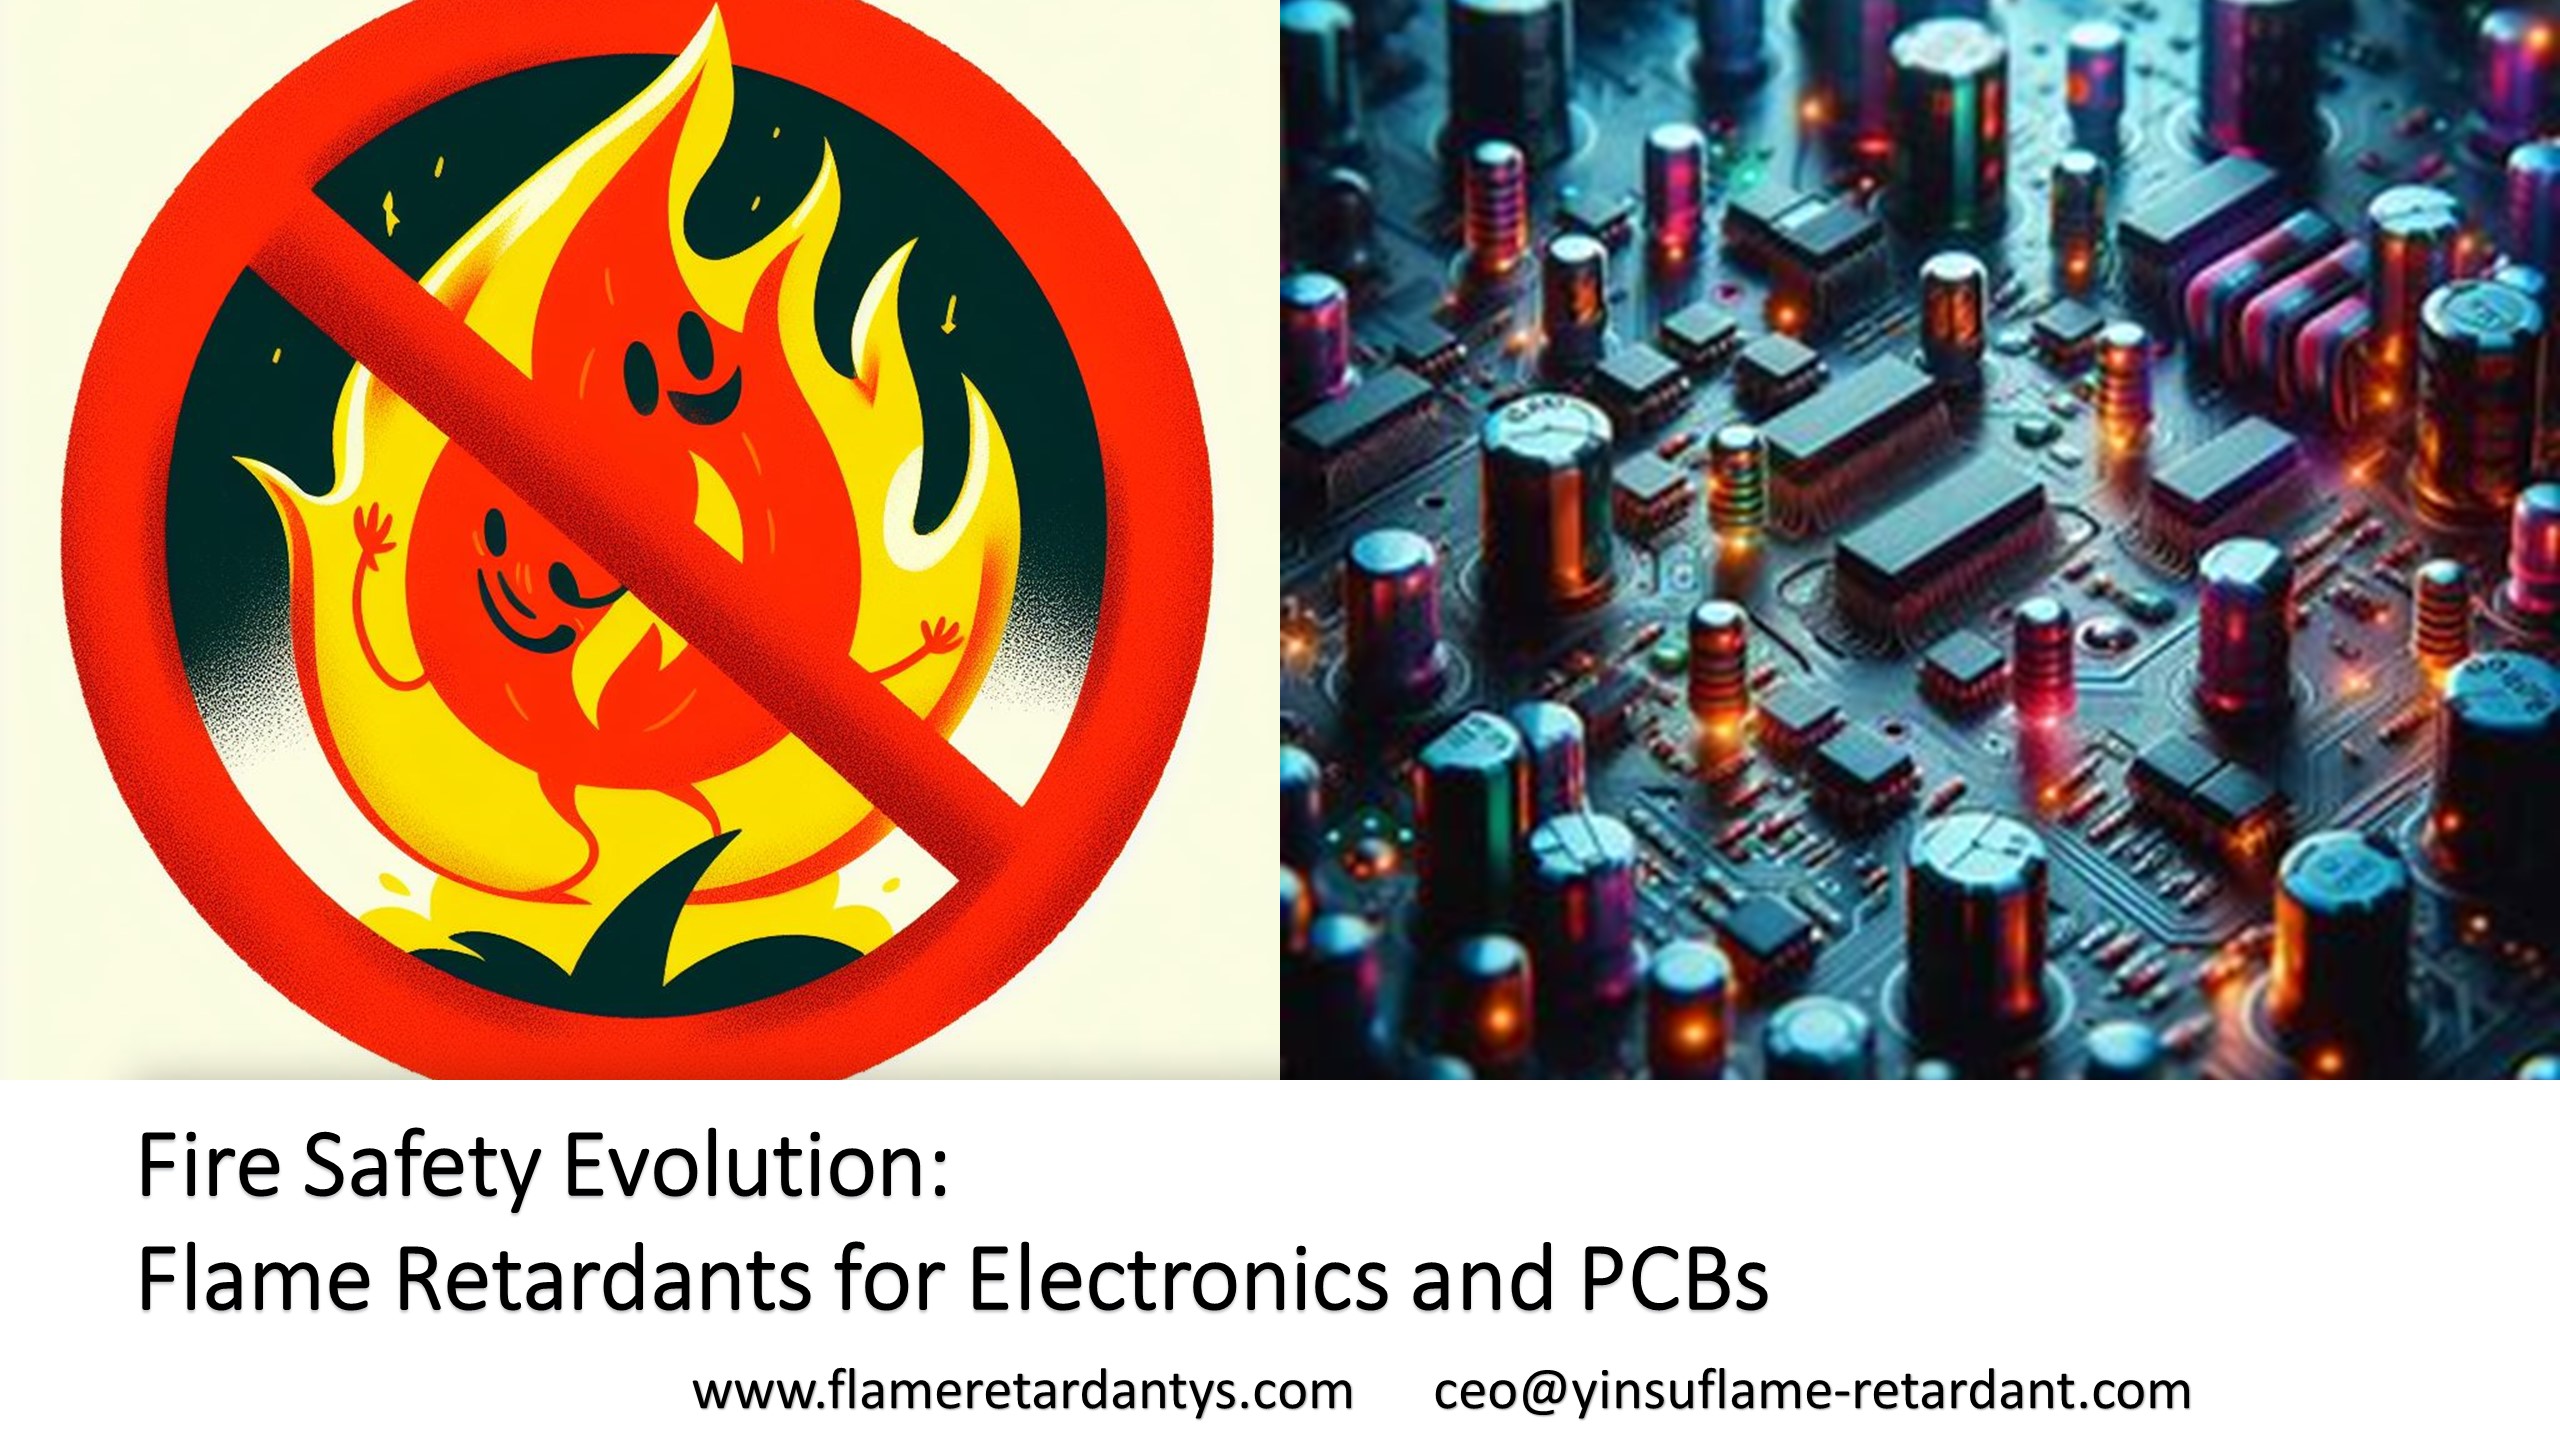 Fire Safety Evolution: Flame Retardants for Electronics And PCBs